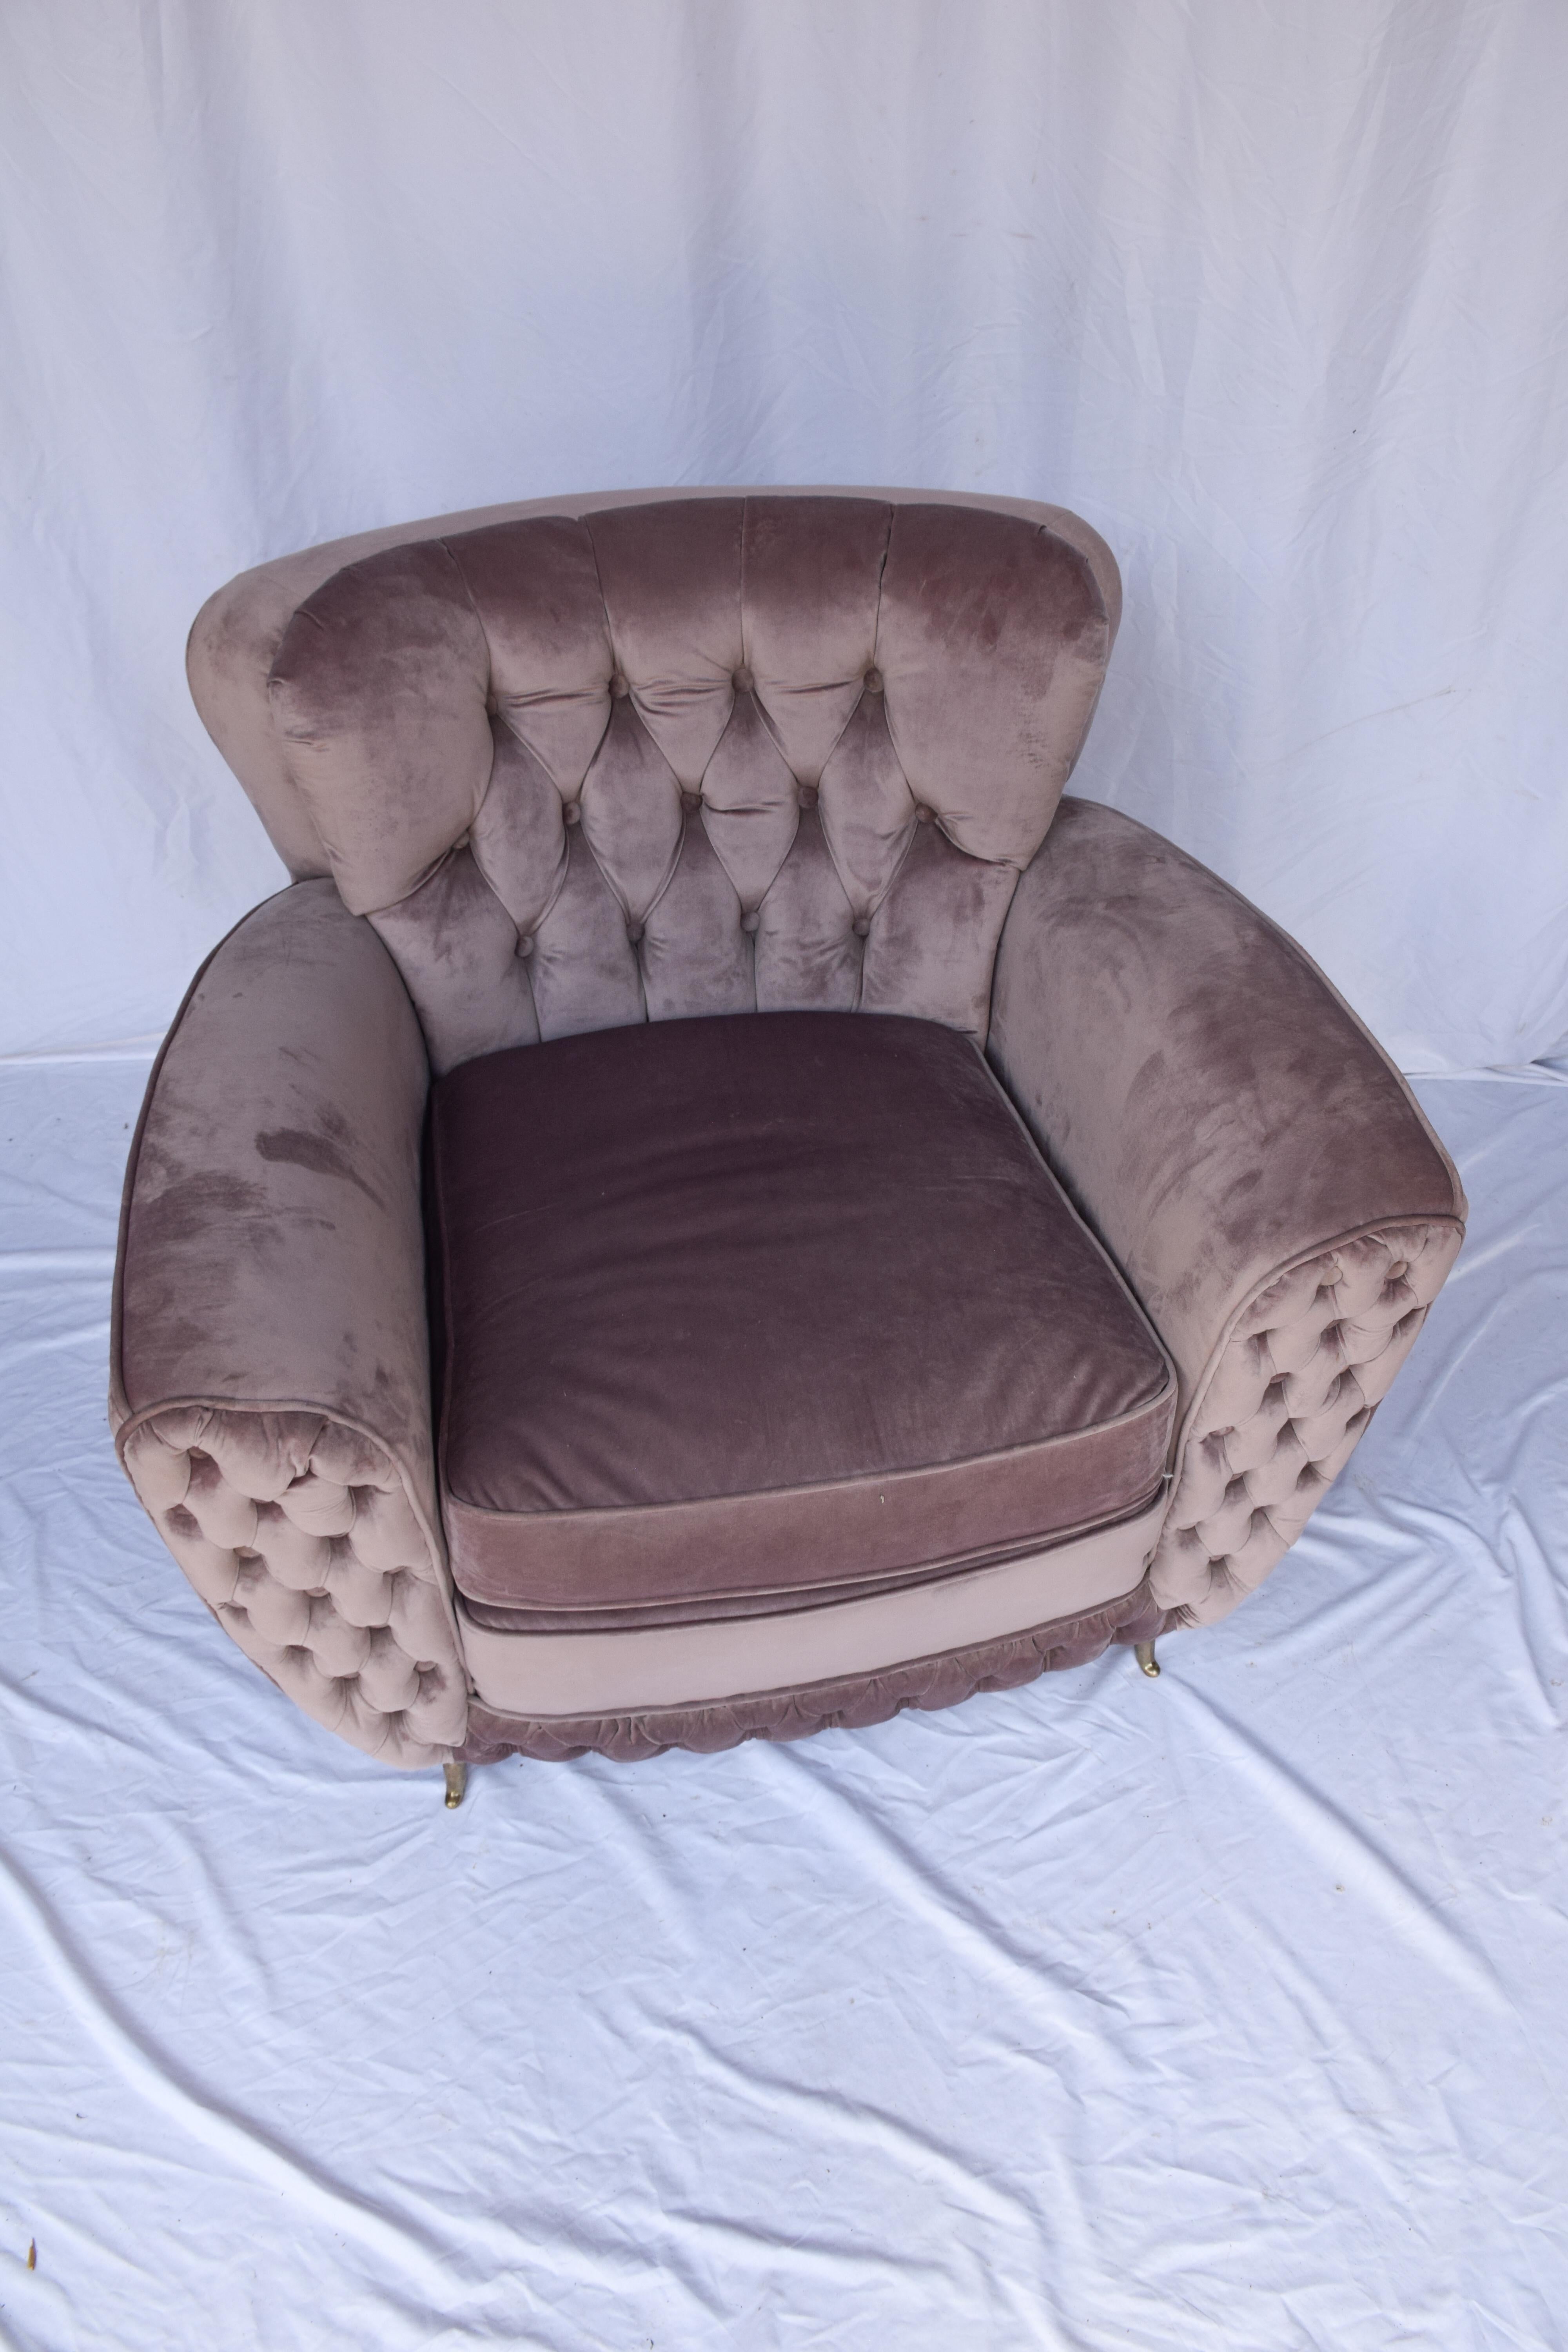 This mid-century tufted lounge chair was found in France. It was recovered in France by a previous owner. Sleek and stylish, we love this lilac color. It's so subtle it's almost a neutral. Will work well in just about any setting.

31